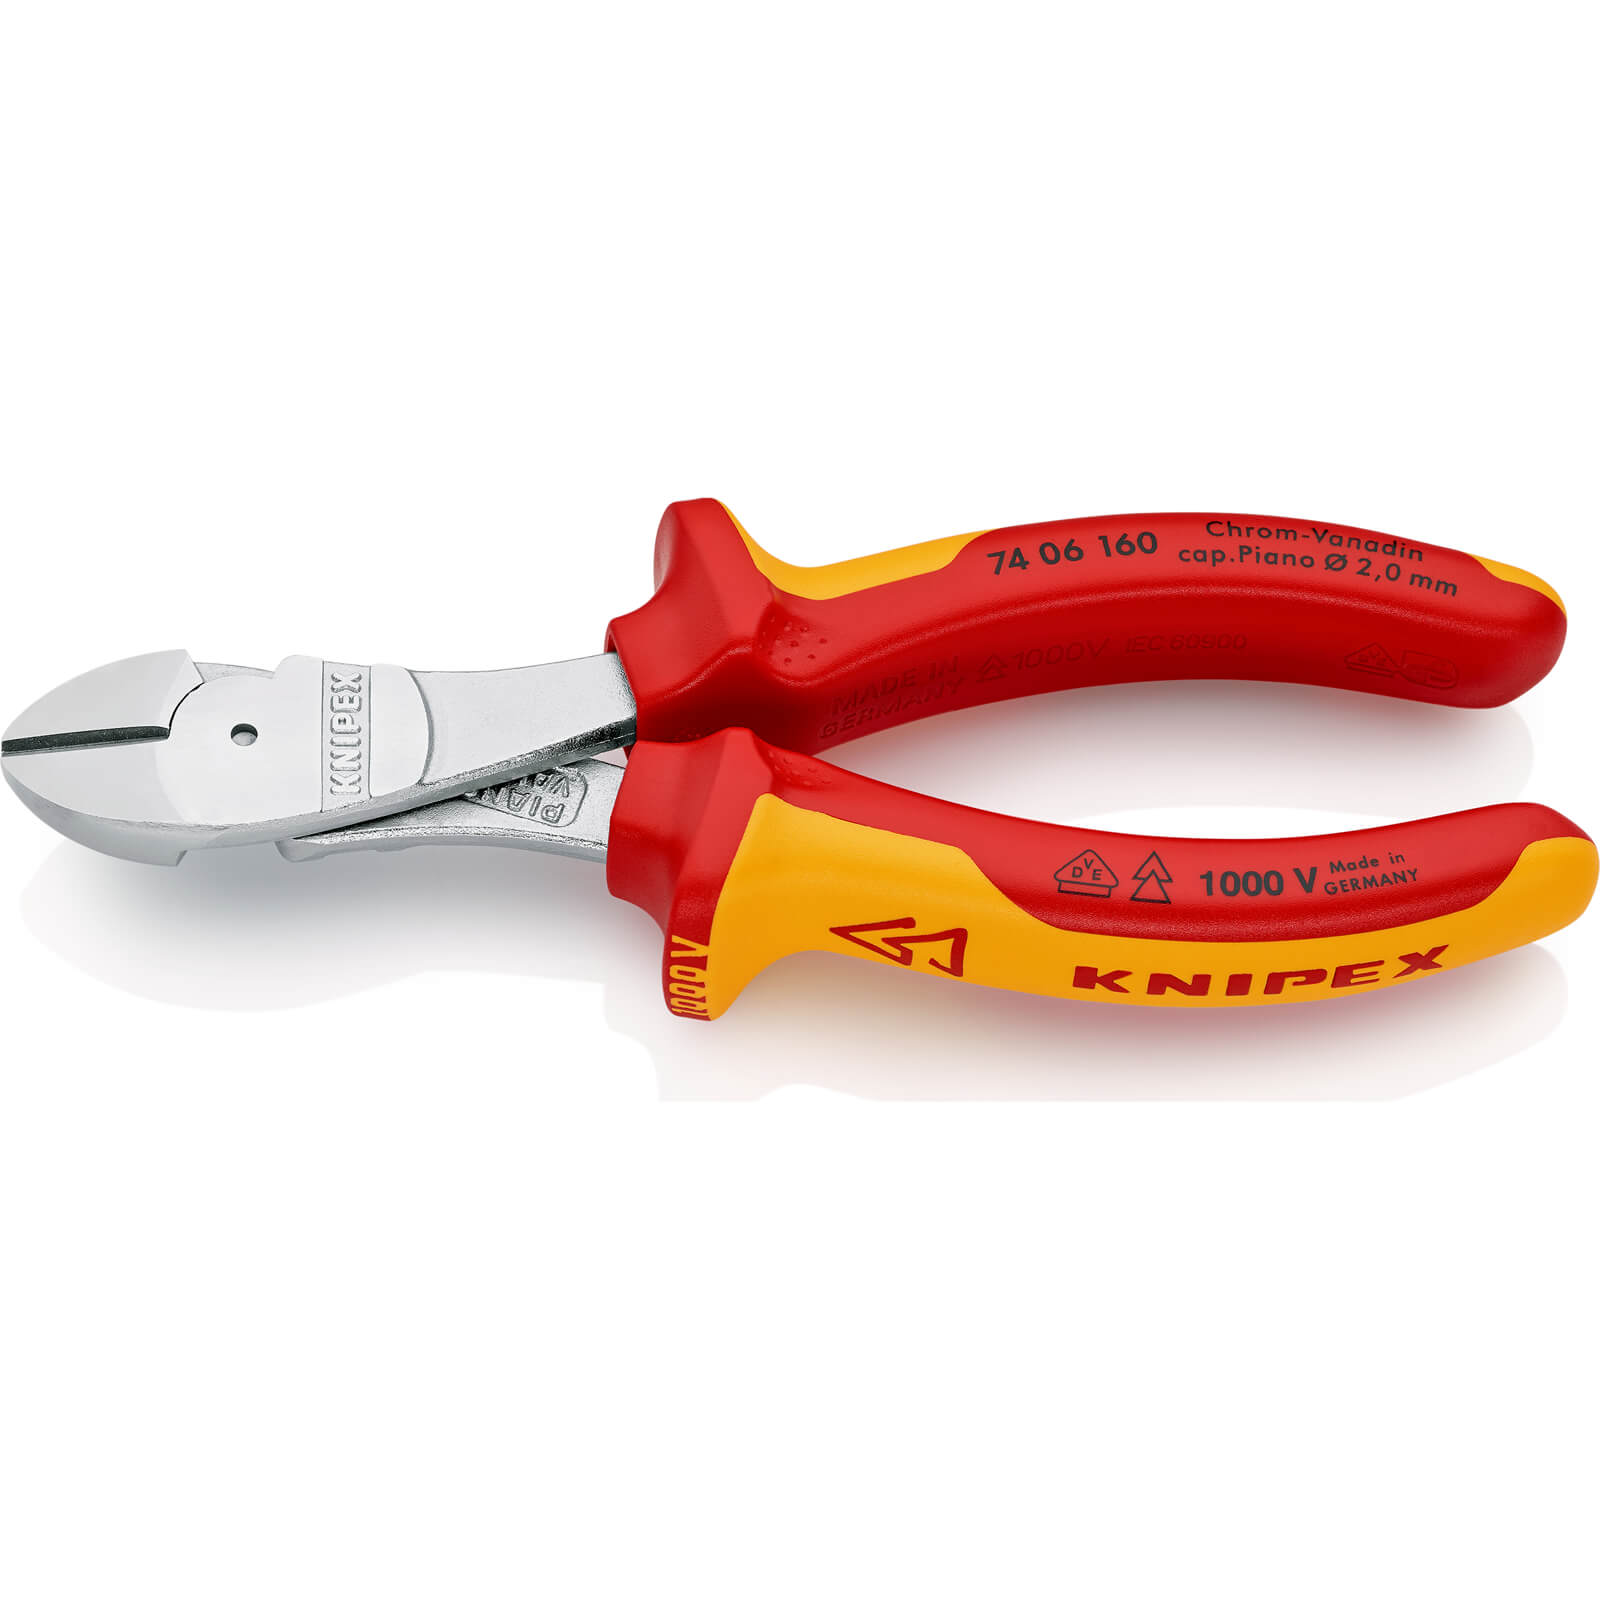 Image of Knipex 74 06 VDE Insulated High Leverage Diagonal Cutting Pliers 160mm